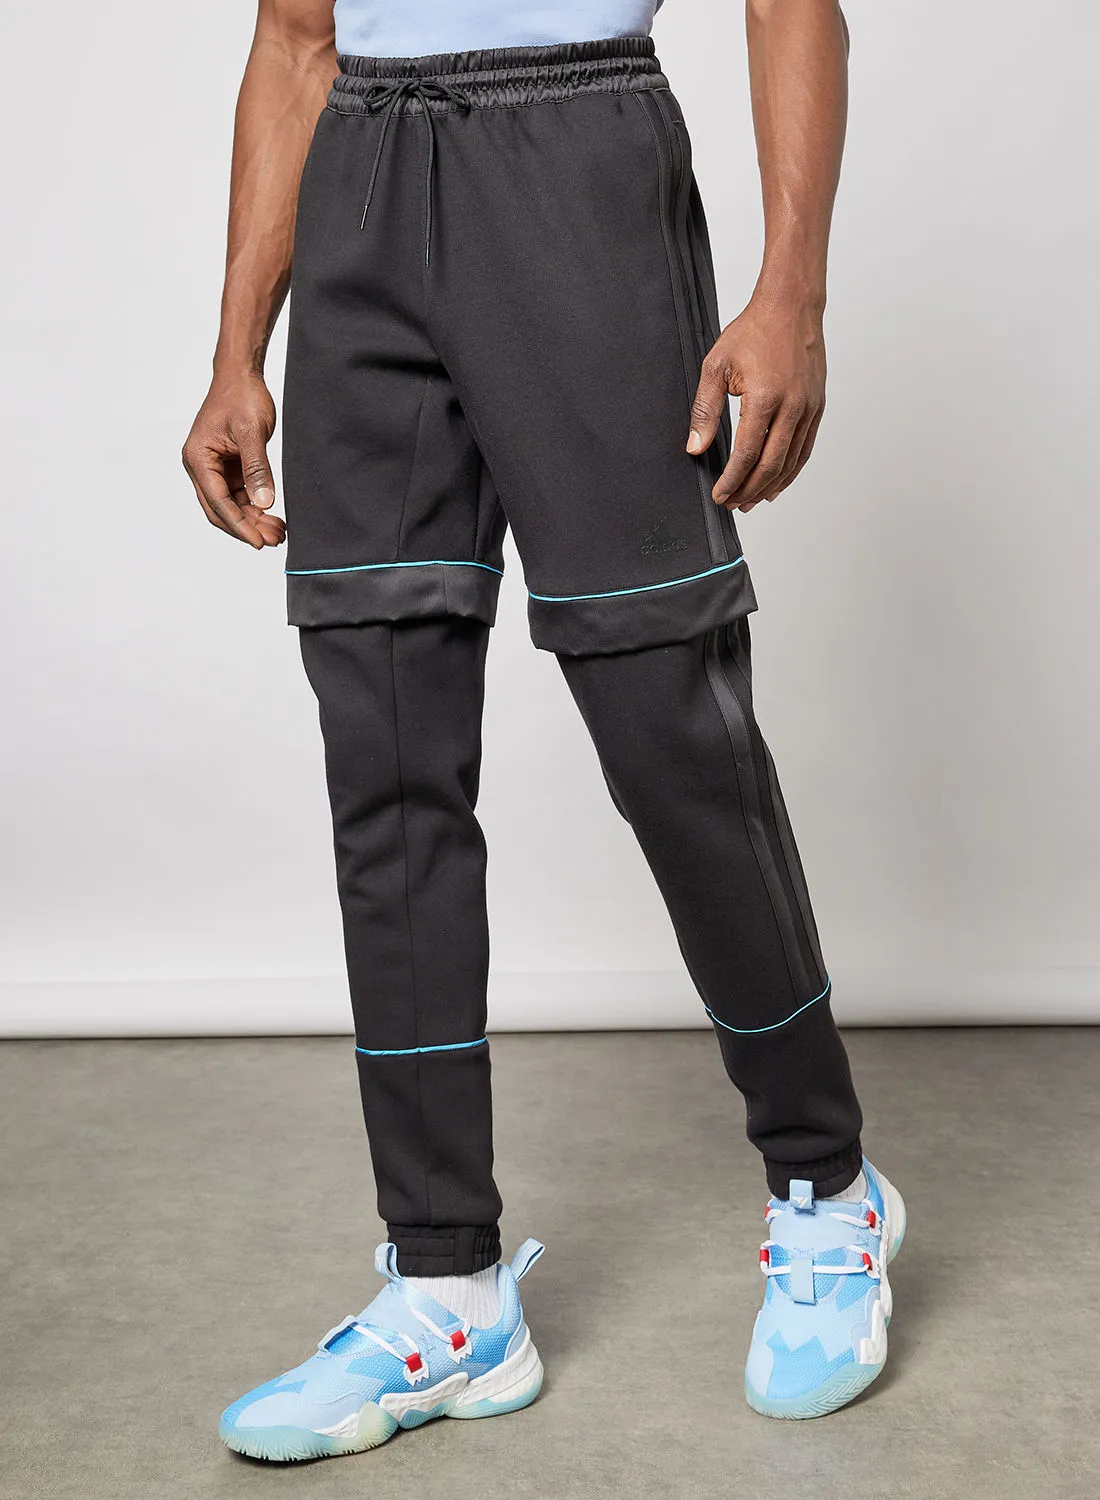 Adidas YOT Two-in-One Pants